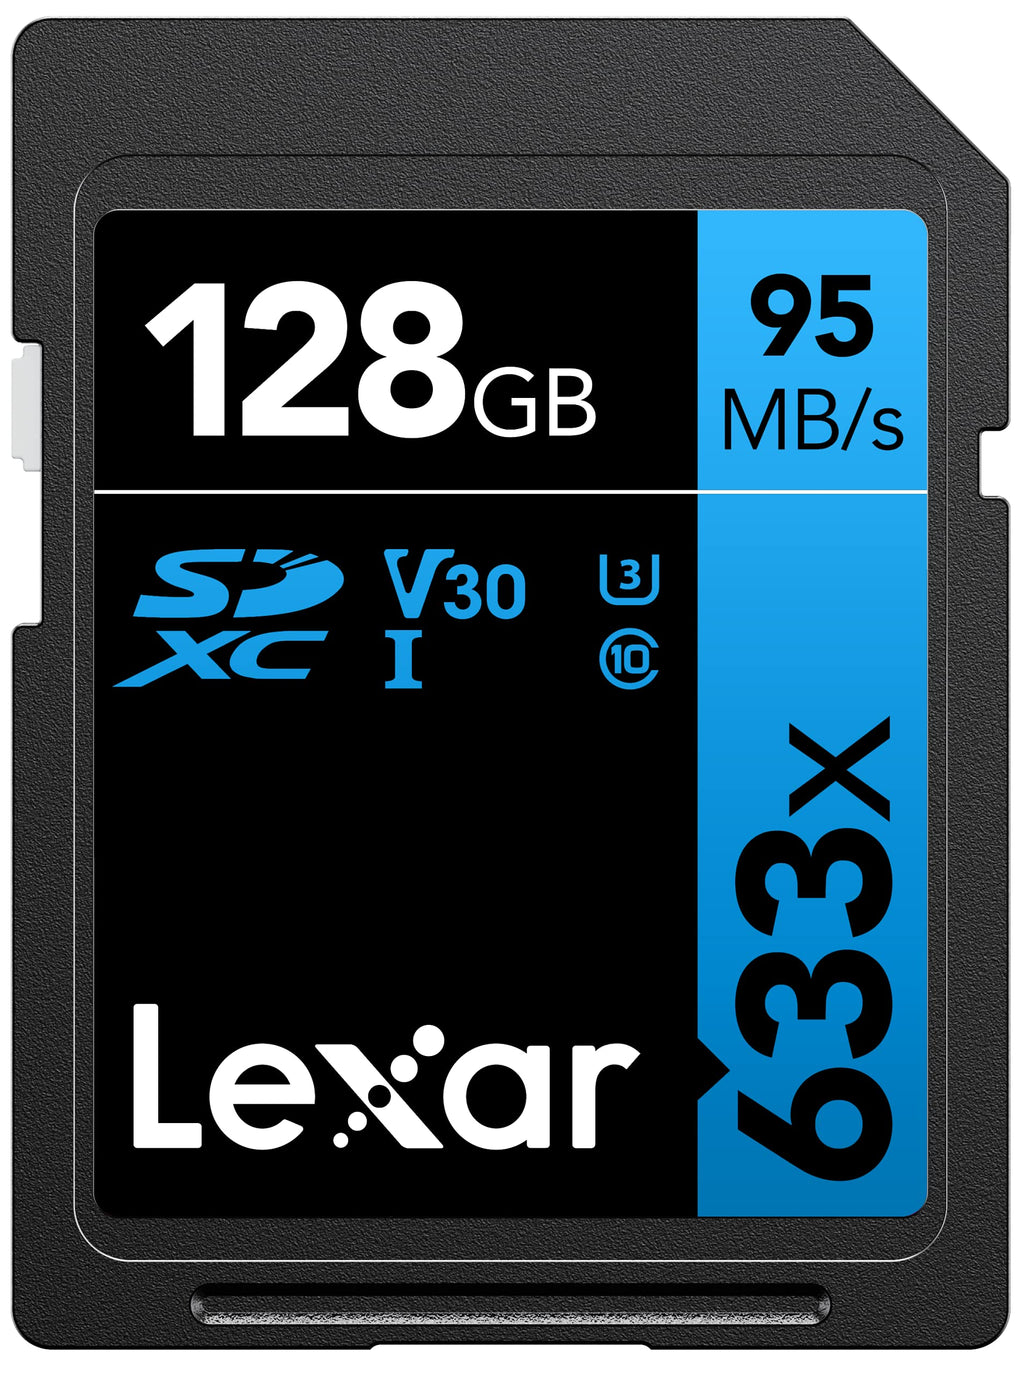 Lexar Professional 633x 128GB SDXC UHS-I Card, Up To 95MB/s Read, for Mid-Range DSLR, HD Camcorder, 3D Cameras, LSD128GCB1NL633 (Product Label May Vary) Single